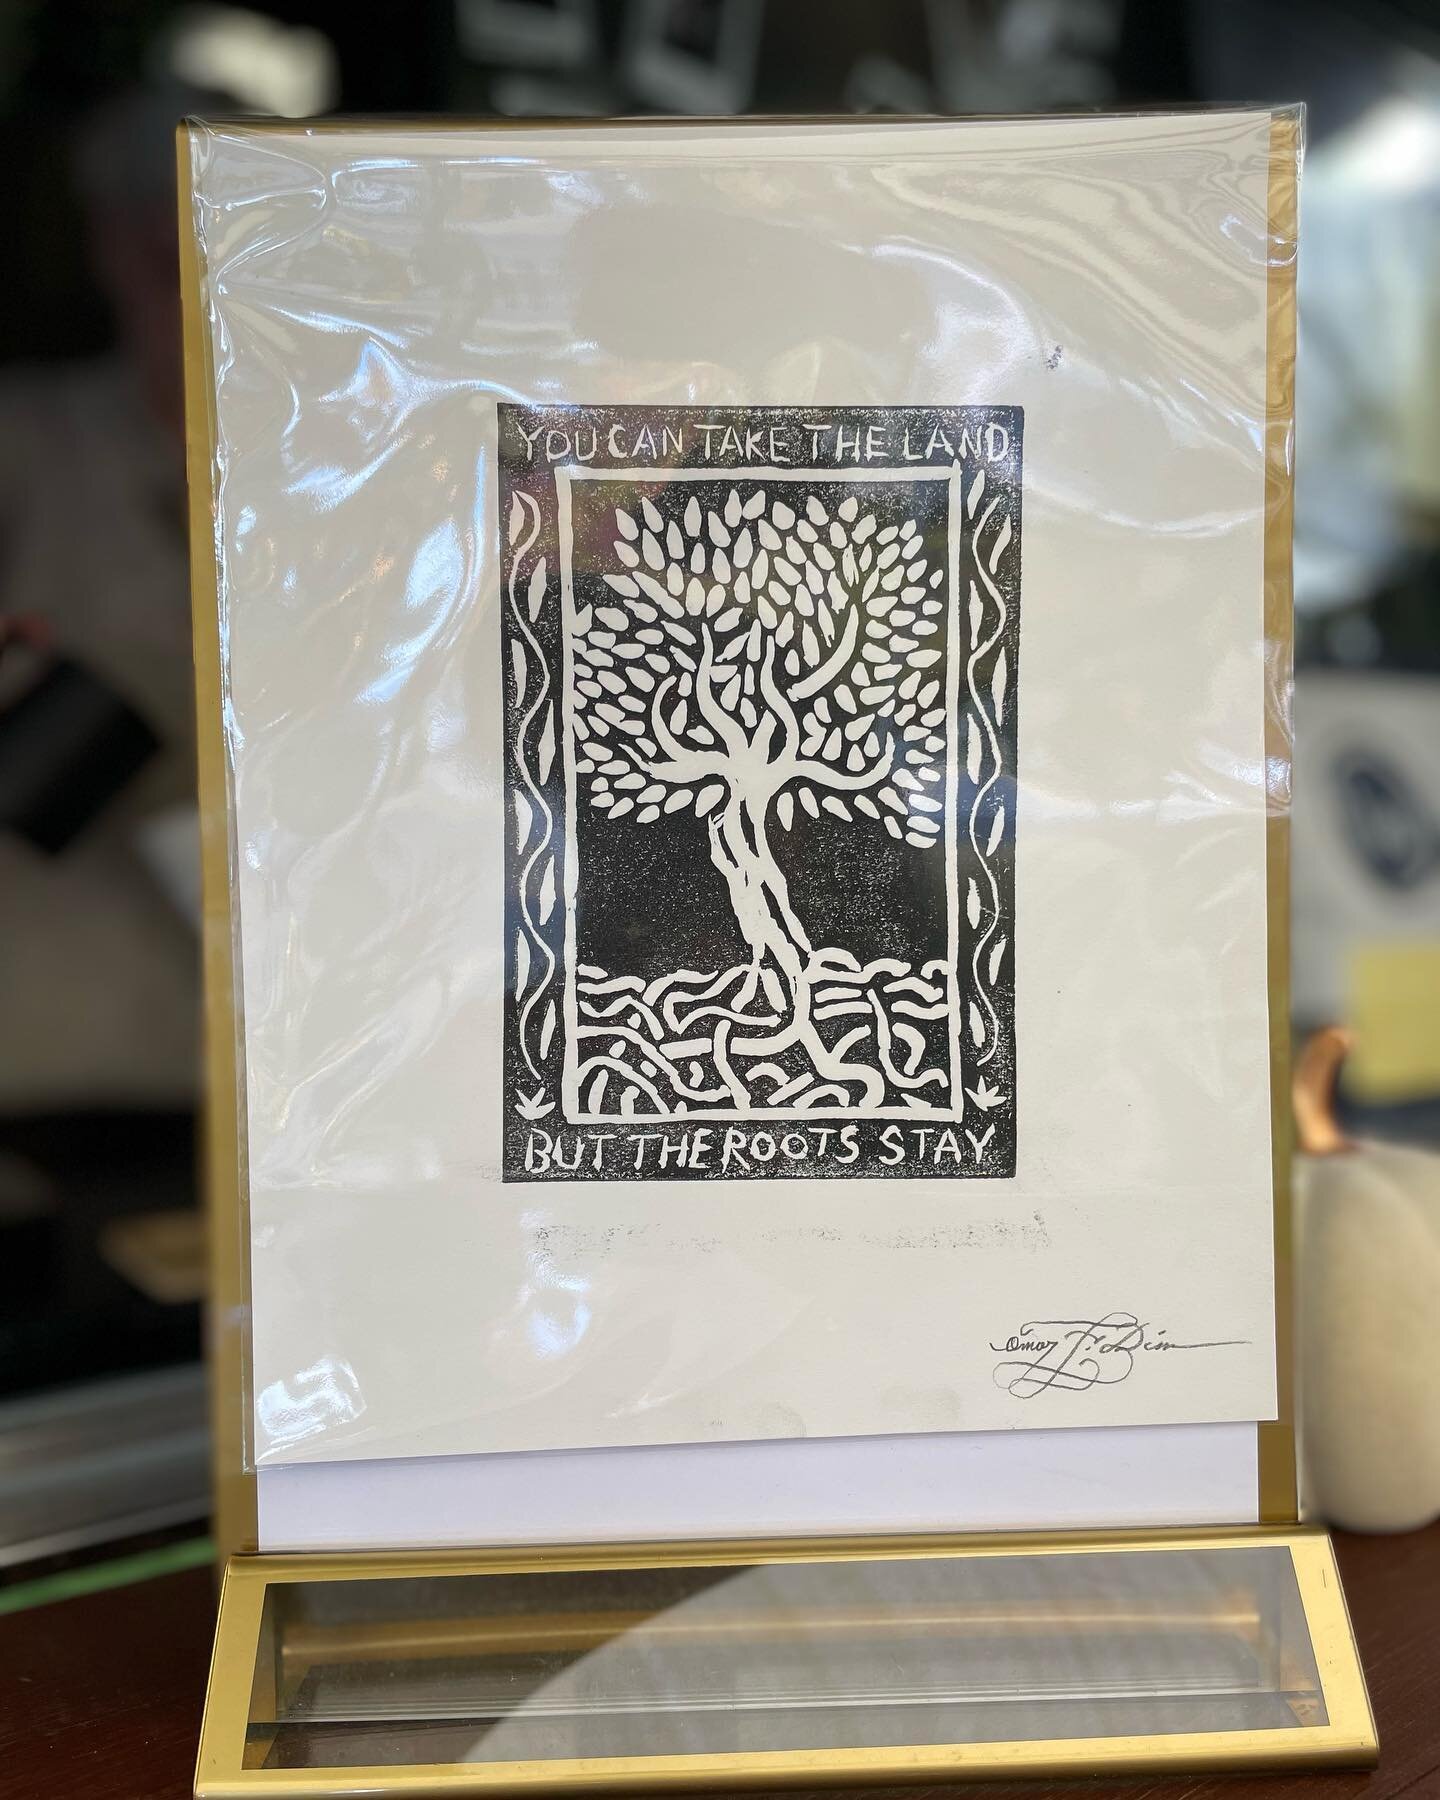 When you come by the Kenz Coffee Bar in Los Gatos you&rsquo;ll see these custom-made 10x8&rdquo; block prints honoring Palestinian liberation by @ooms_art_acct. We&rsquo;re giving away a limited amount. All you have to do is donate to Palestine Child